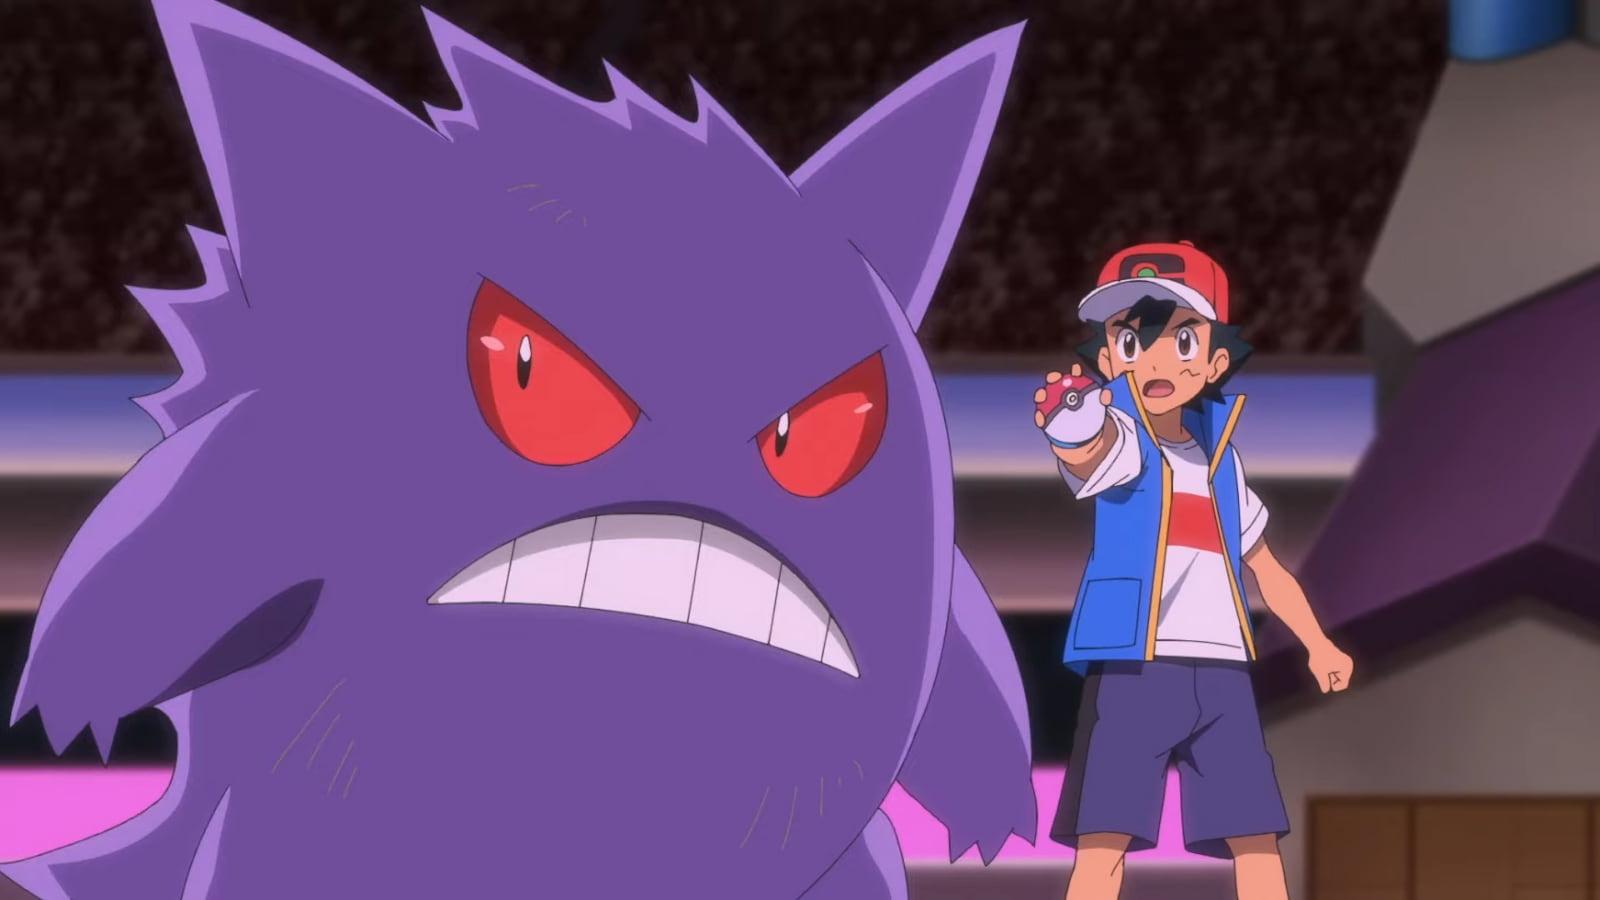 Ash and Gengar just about to battle in the Pokemon anime